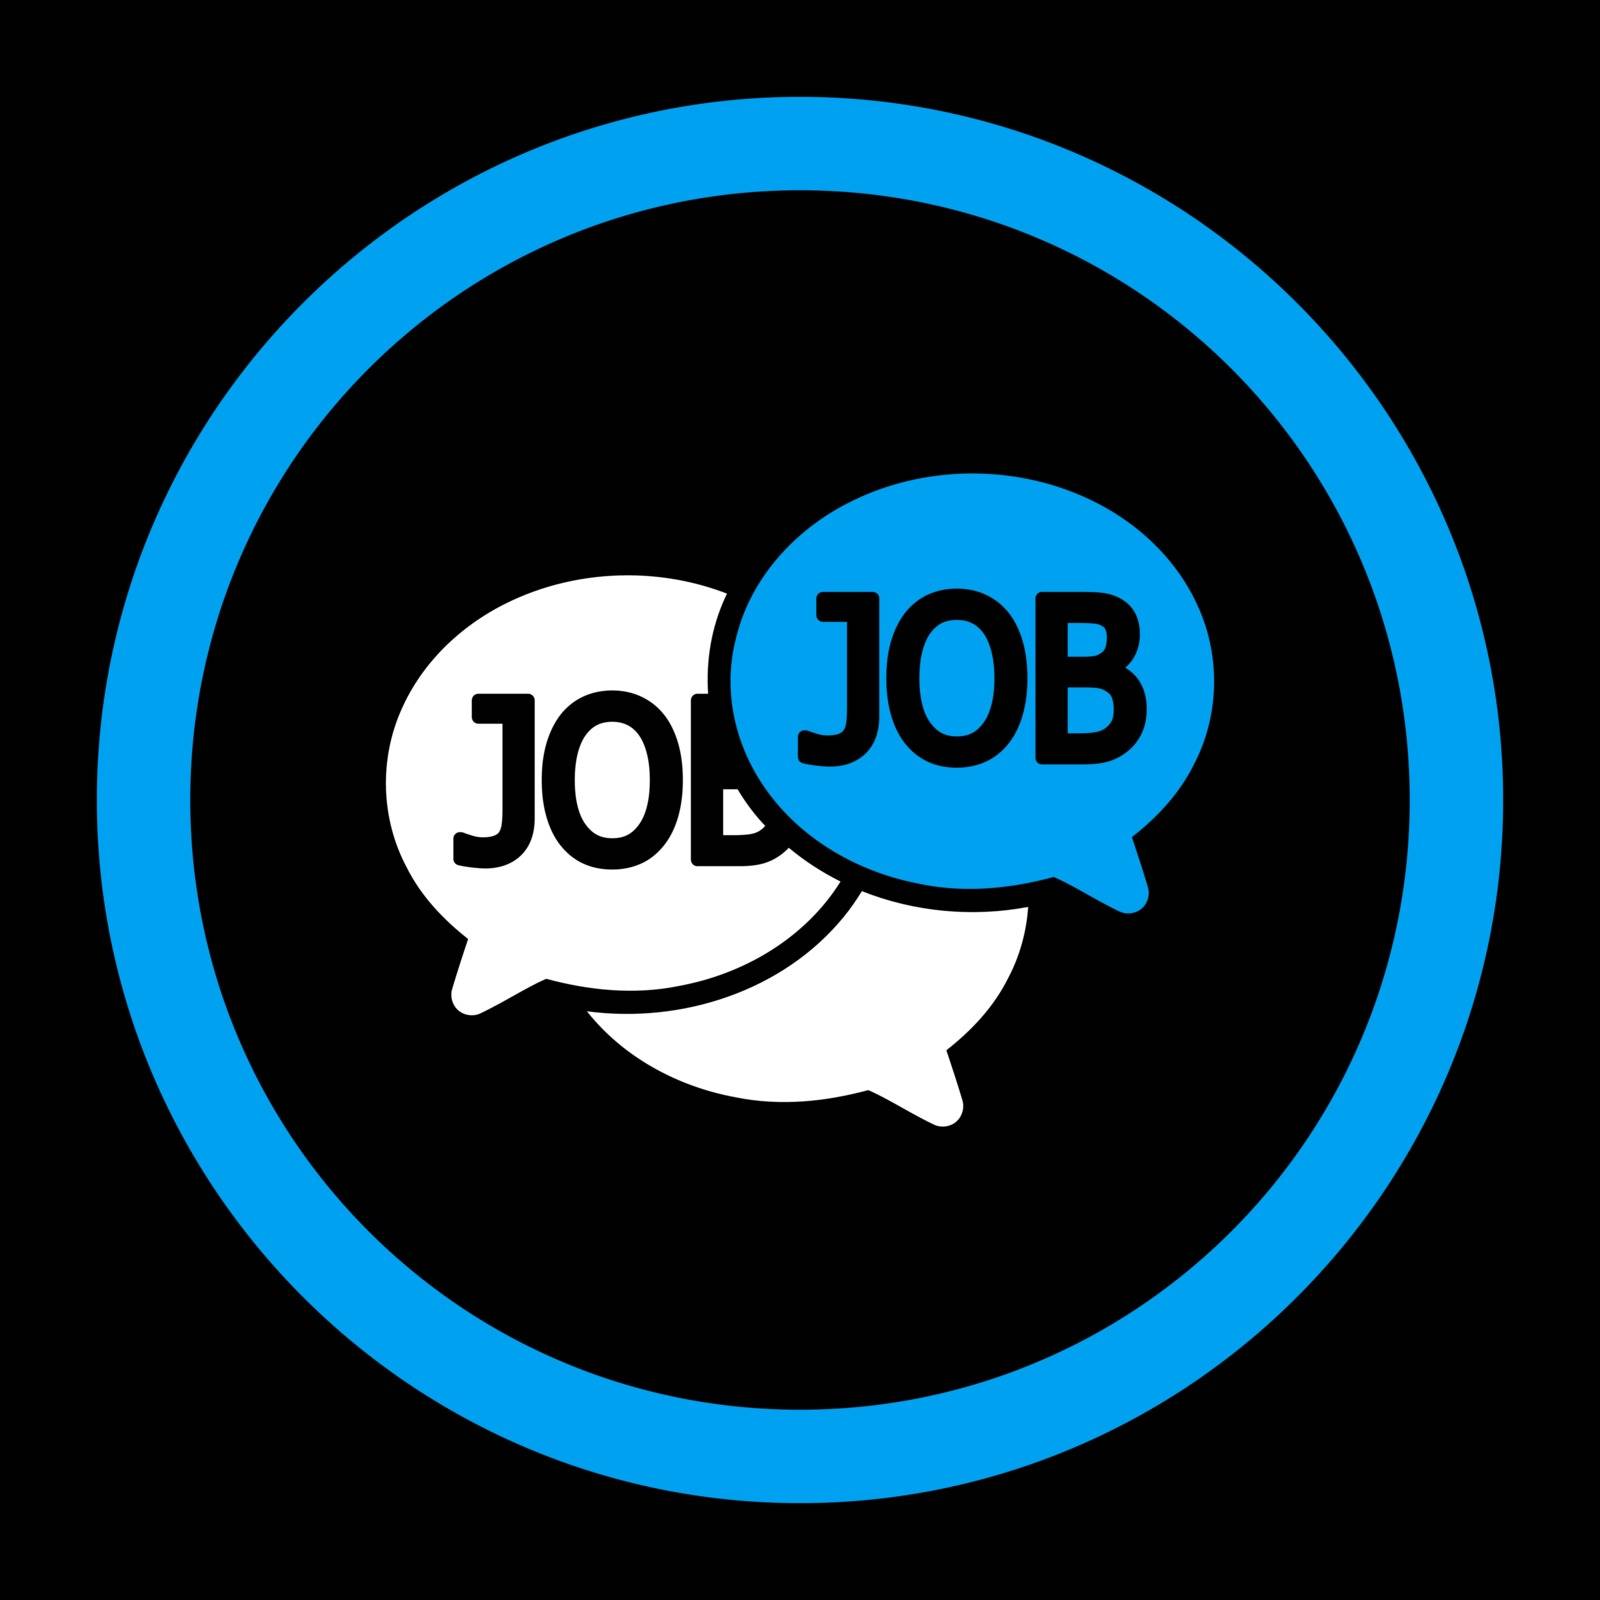 Labor Market vector icon. This flat rounded symbol uses blue and white colors and isolated on a black background.